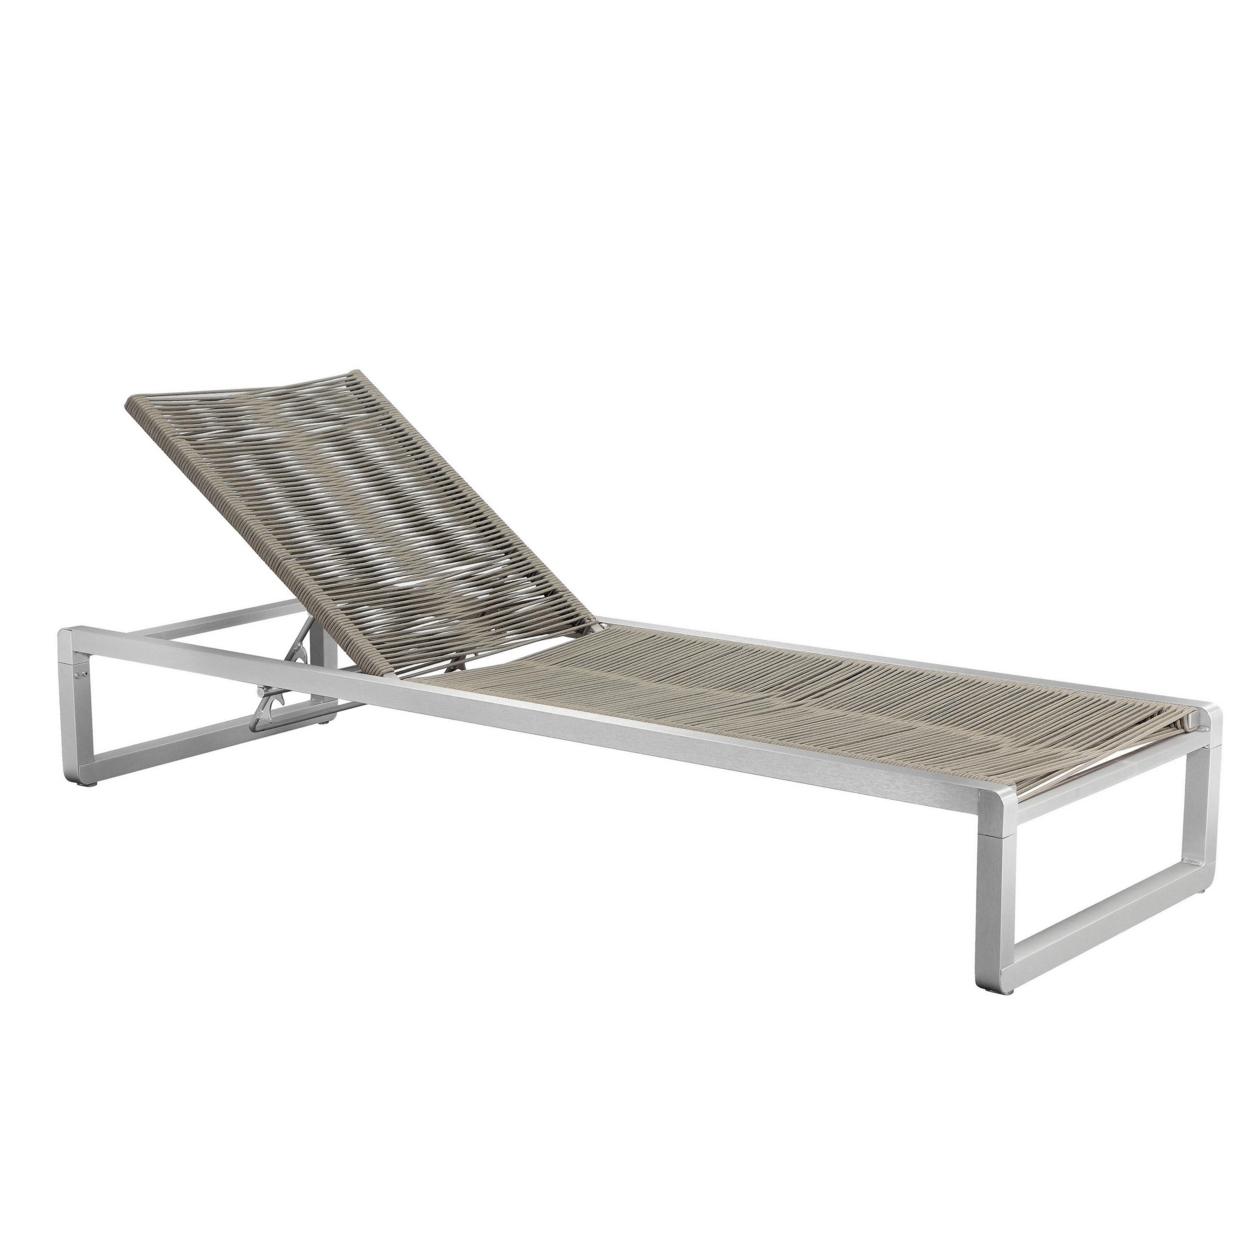 Kylo 76 Inch Outdoor Chaise Lounger, Smooth Gray Aluminum Frame, Adjustable- Saltoro Sherpi